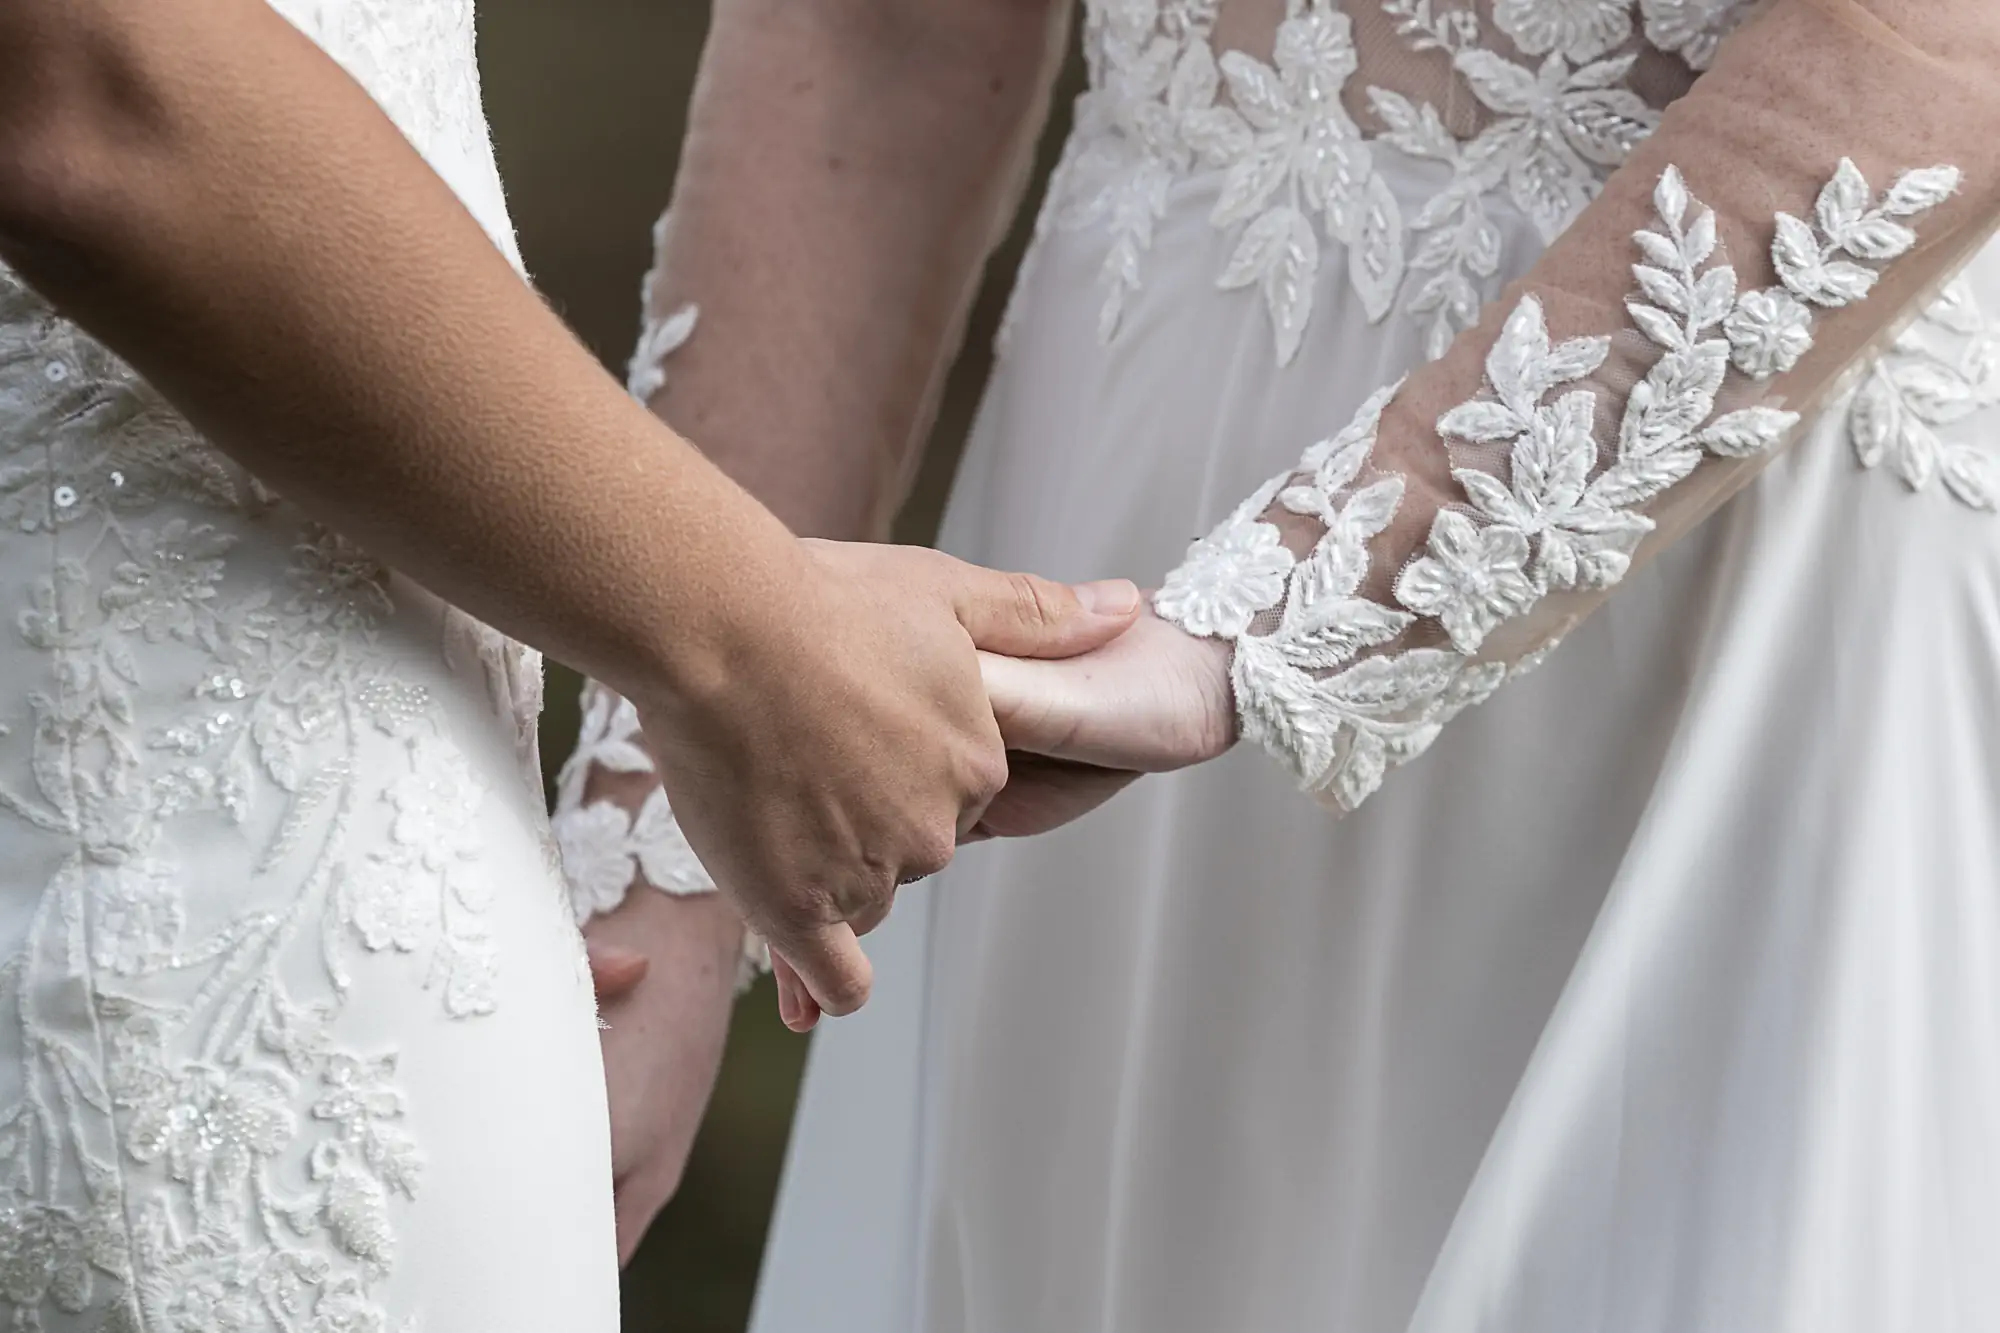 girls holding hands as they exchange vows